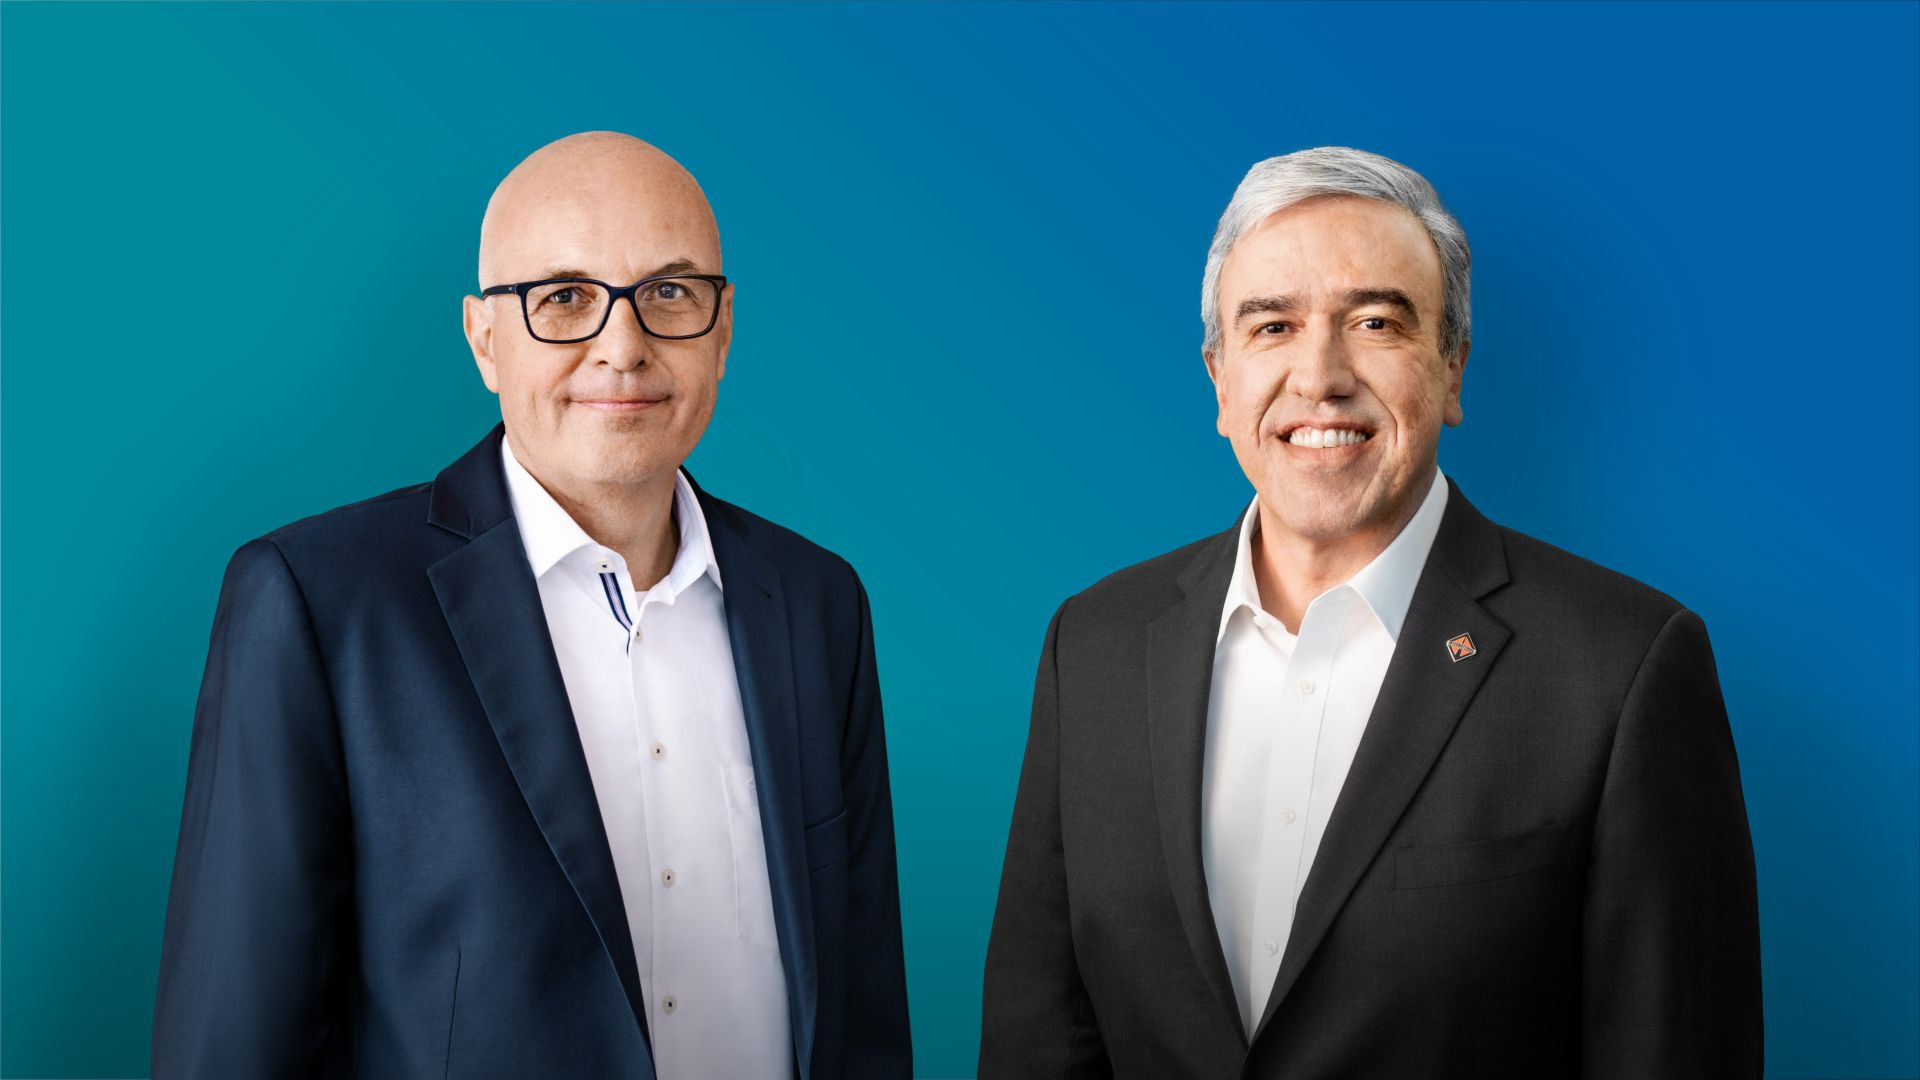 Image of Matthias Gründler (CEO TRATON SE, left) and Persio Lisboa (CEO Navistar Inc., right) in front of a blue background